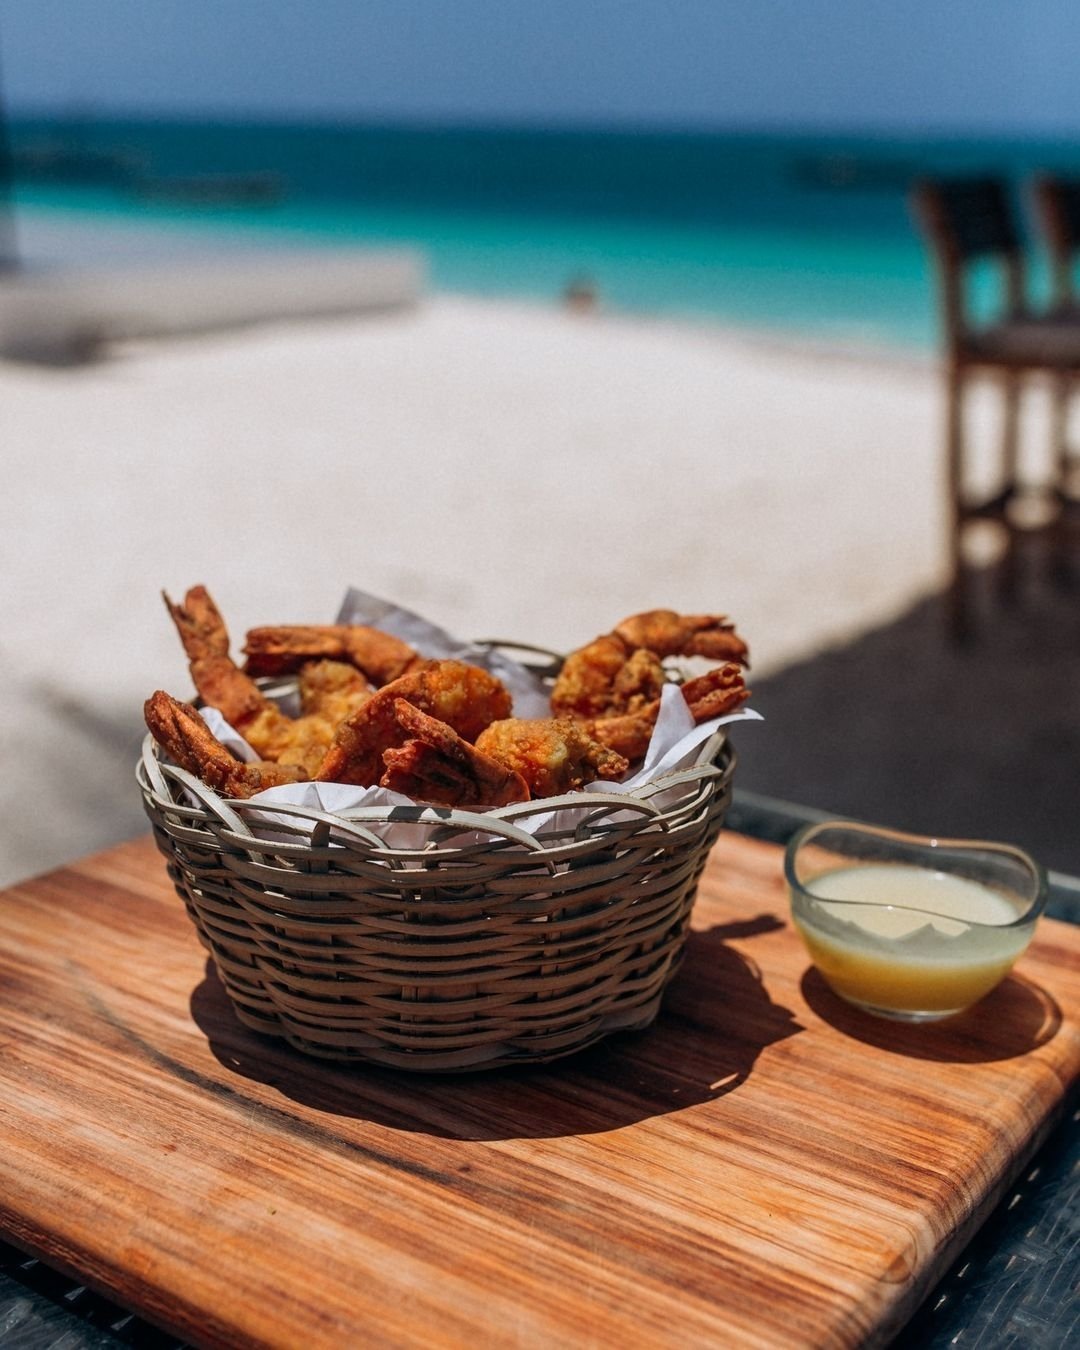 Zanzibar is full of wonderful places to have breakfast, lunch or dinner. But what about after you've finished dining and aren't ready to call it a day yet?

 You can head to @zee_bar_nungwi&mdash;the perfect spot to wind down with a zesty twist after